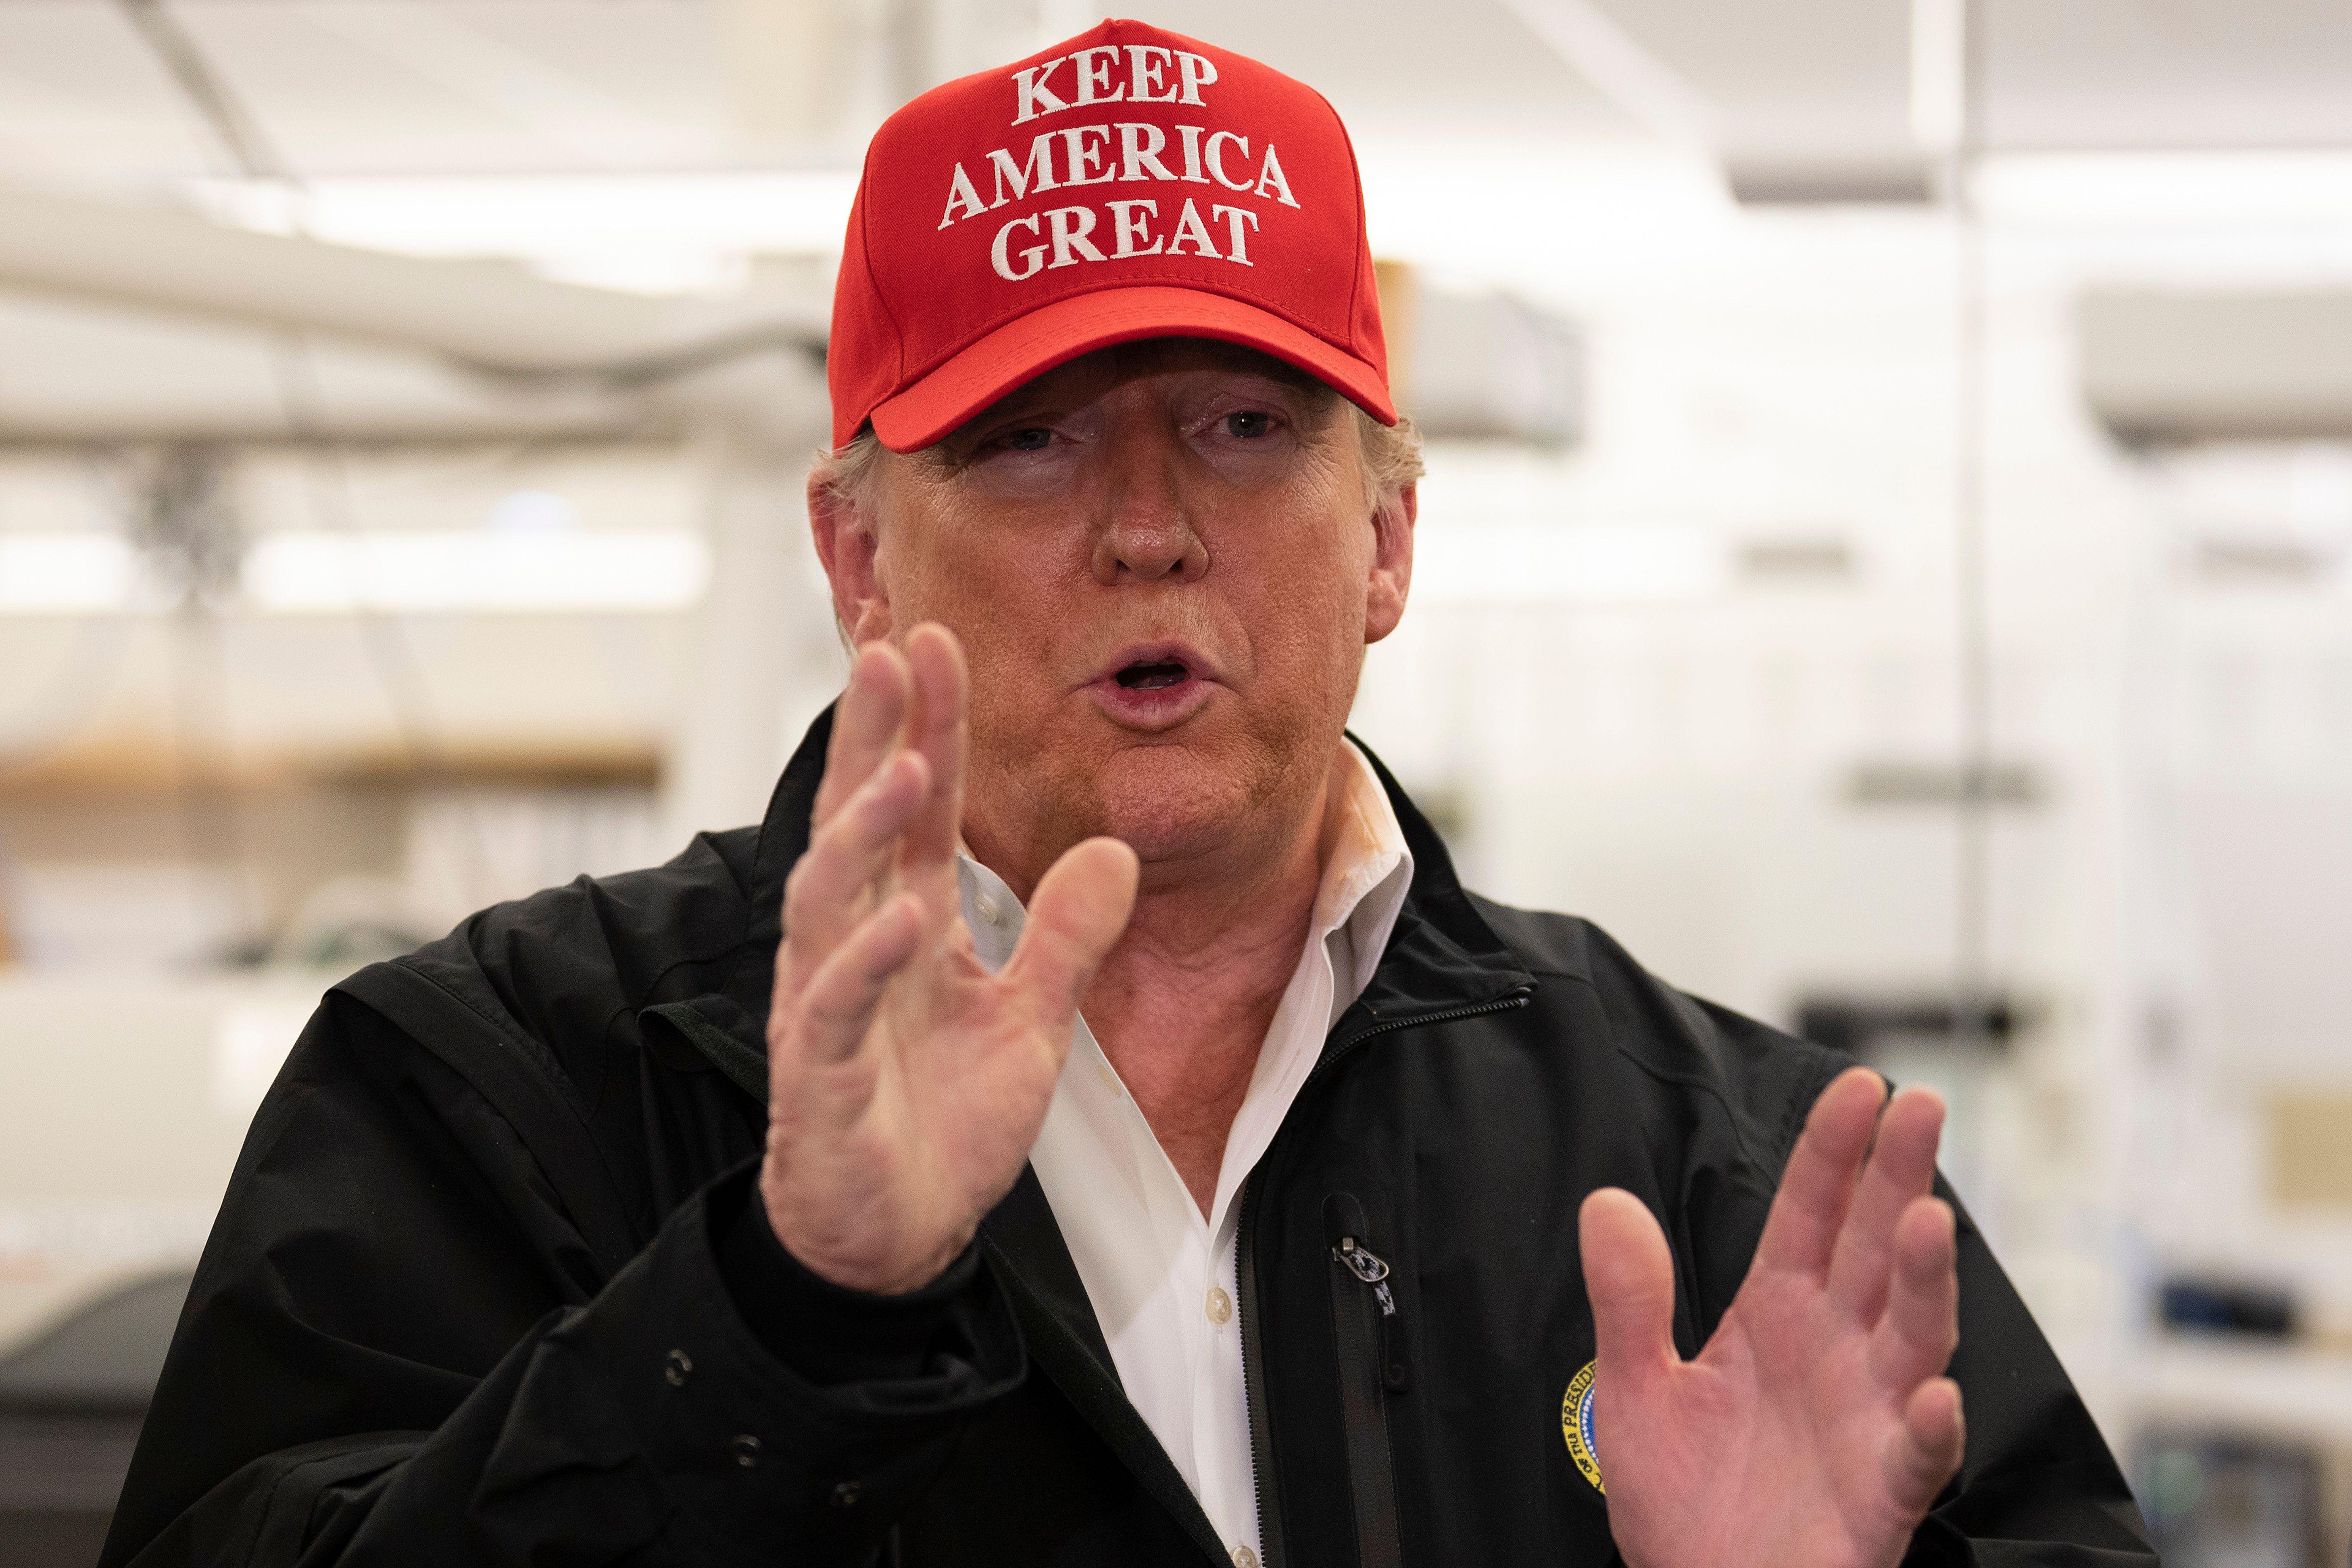 US President Donald Trump speaks during a tour of the Centers for Disease Control and Prevention (CDC) in Atlanta, Georgia, on March 6, 2020. (Photo by JIM WATSON / AFP) (Photo by JIM WATSON/AFP via Getty Images)